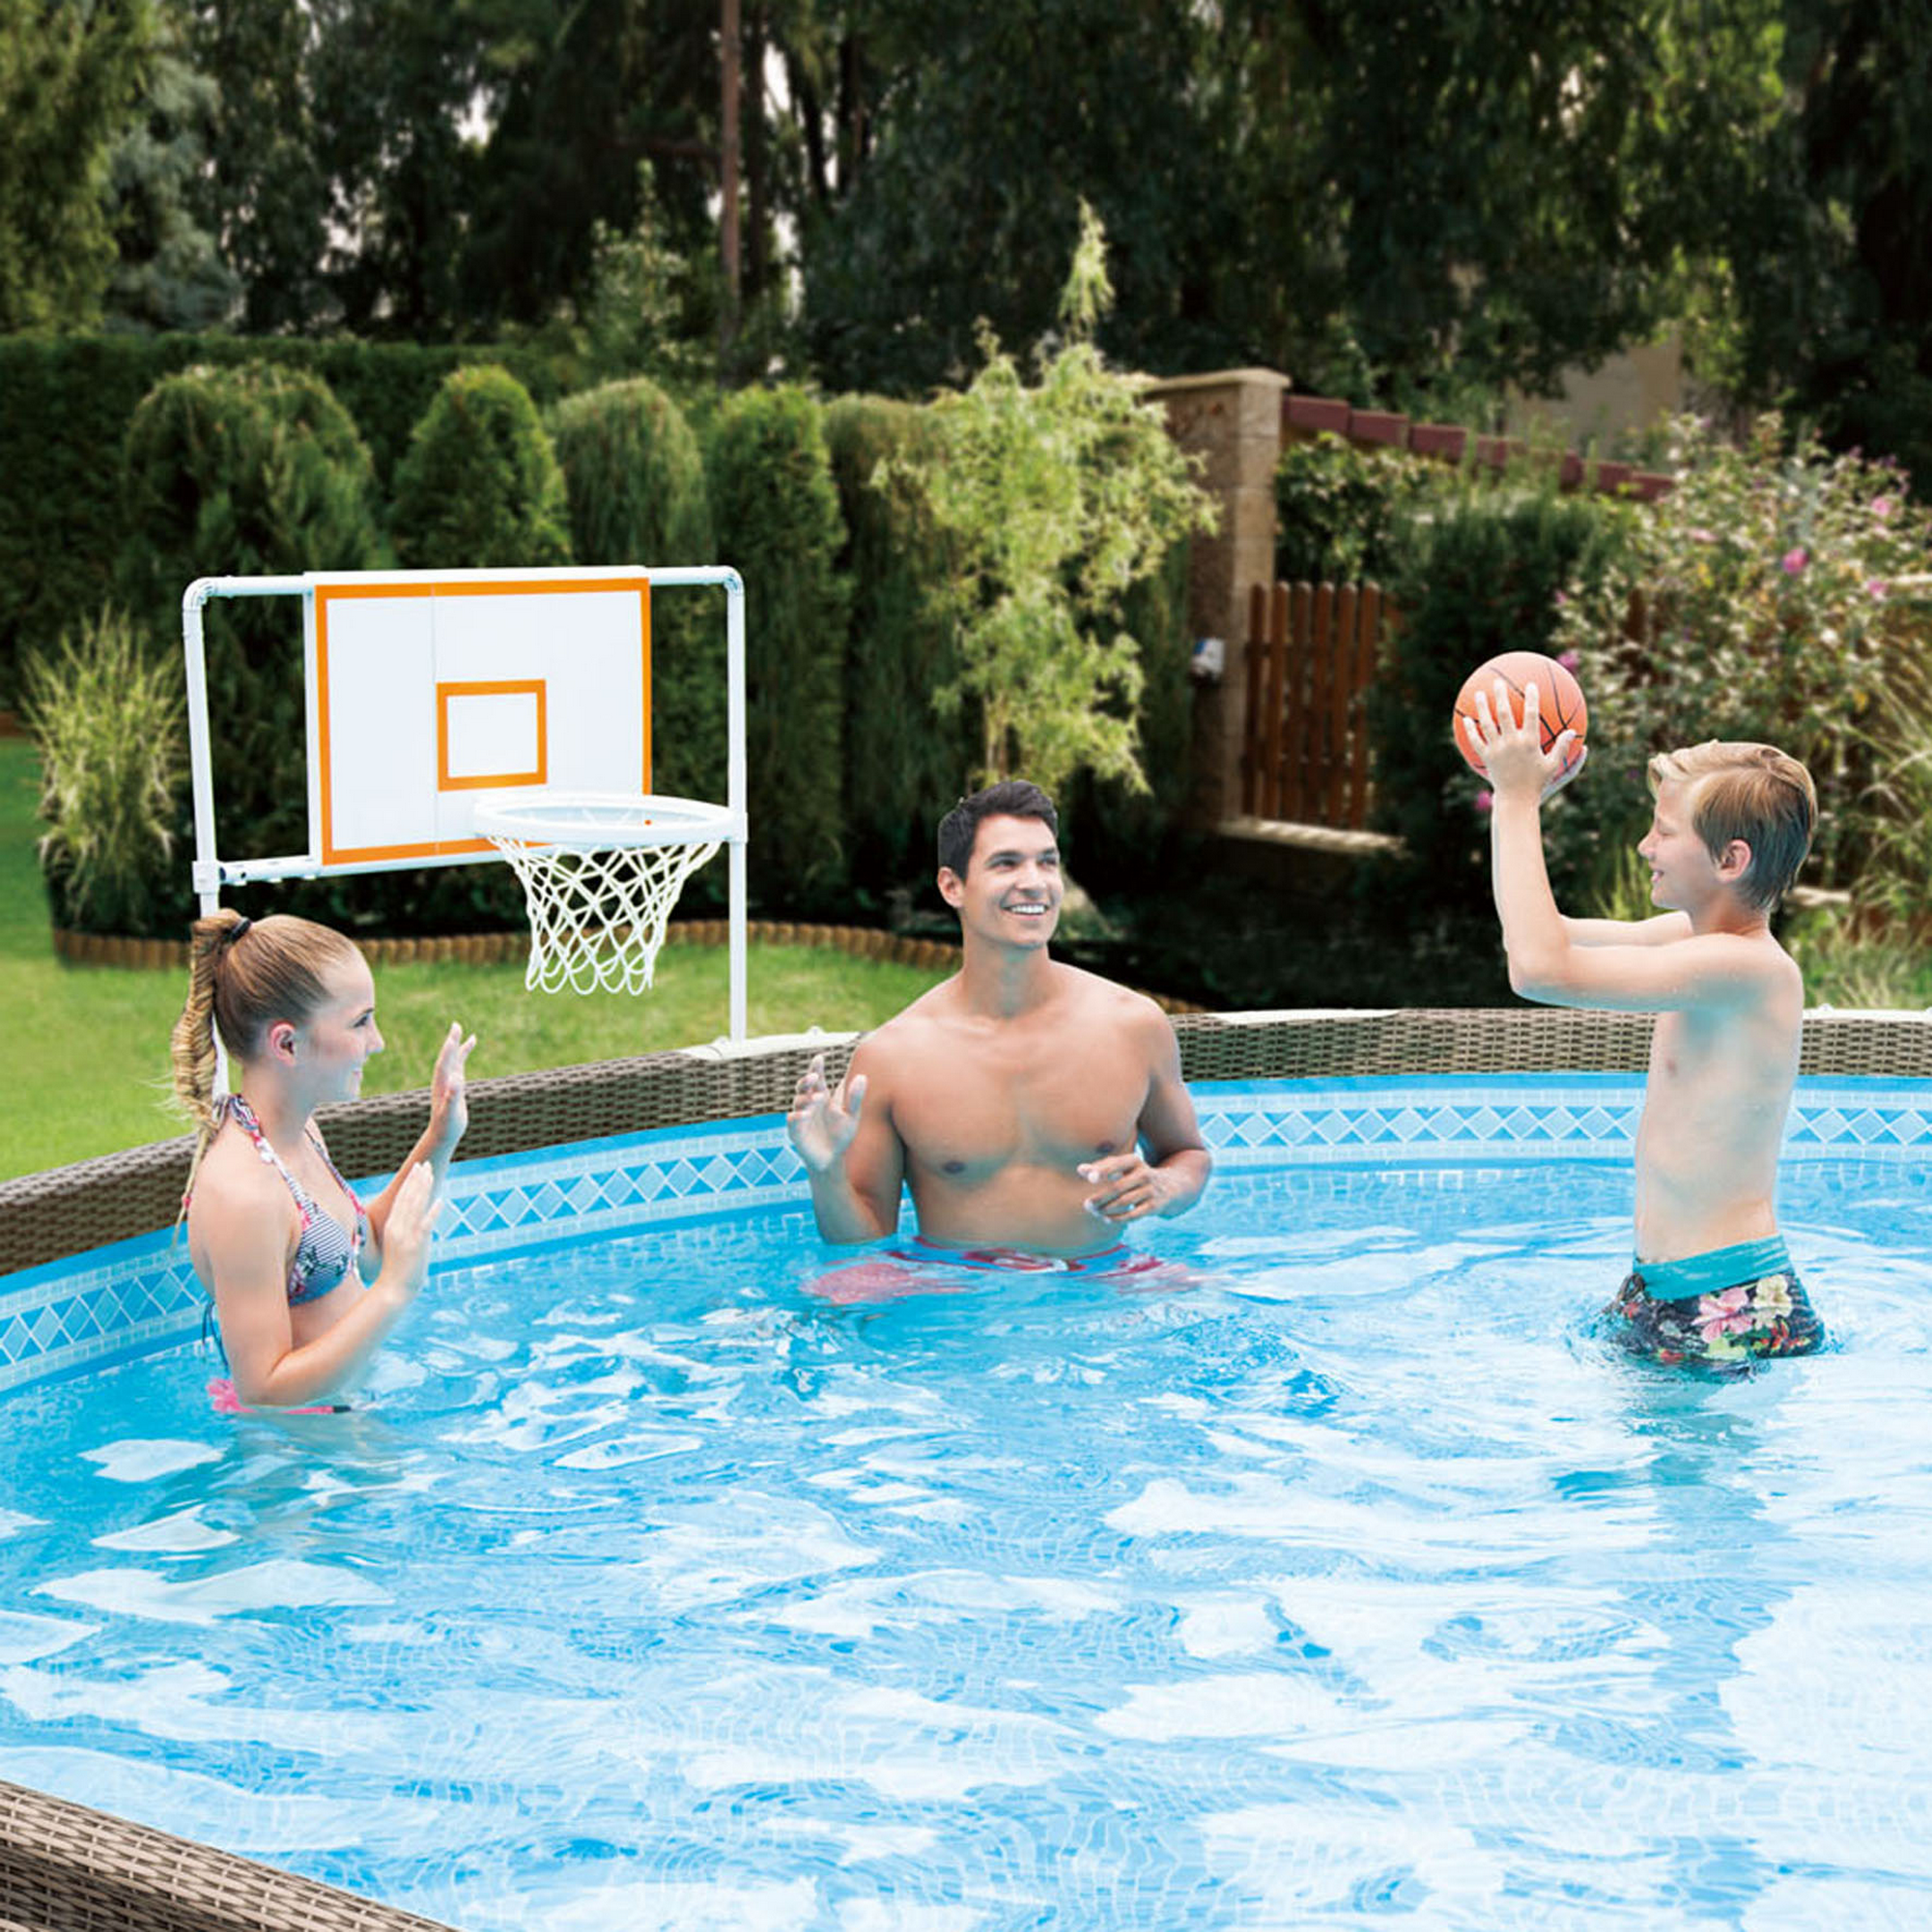 Pool Basketball-Set weiß/orange inklusive Wasserball 110 x 41 x 95 cm + product picture